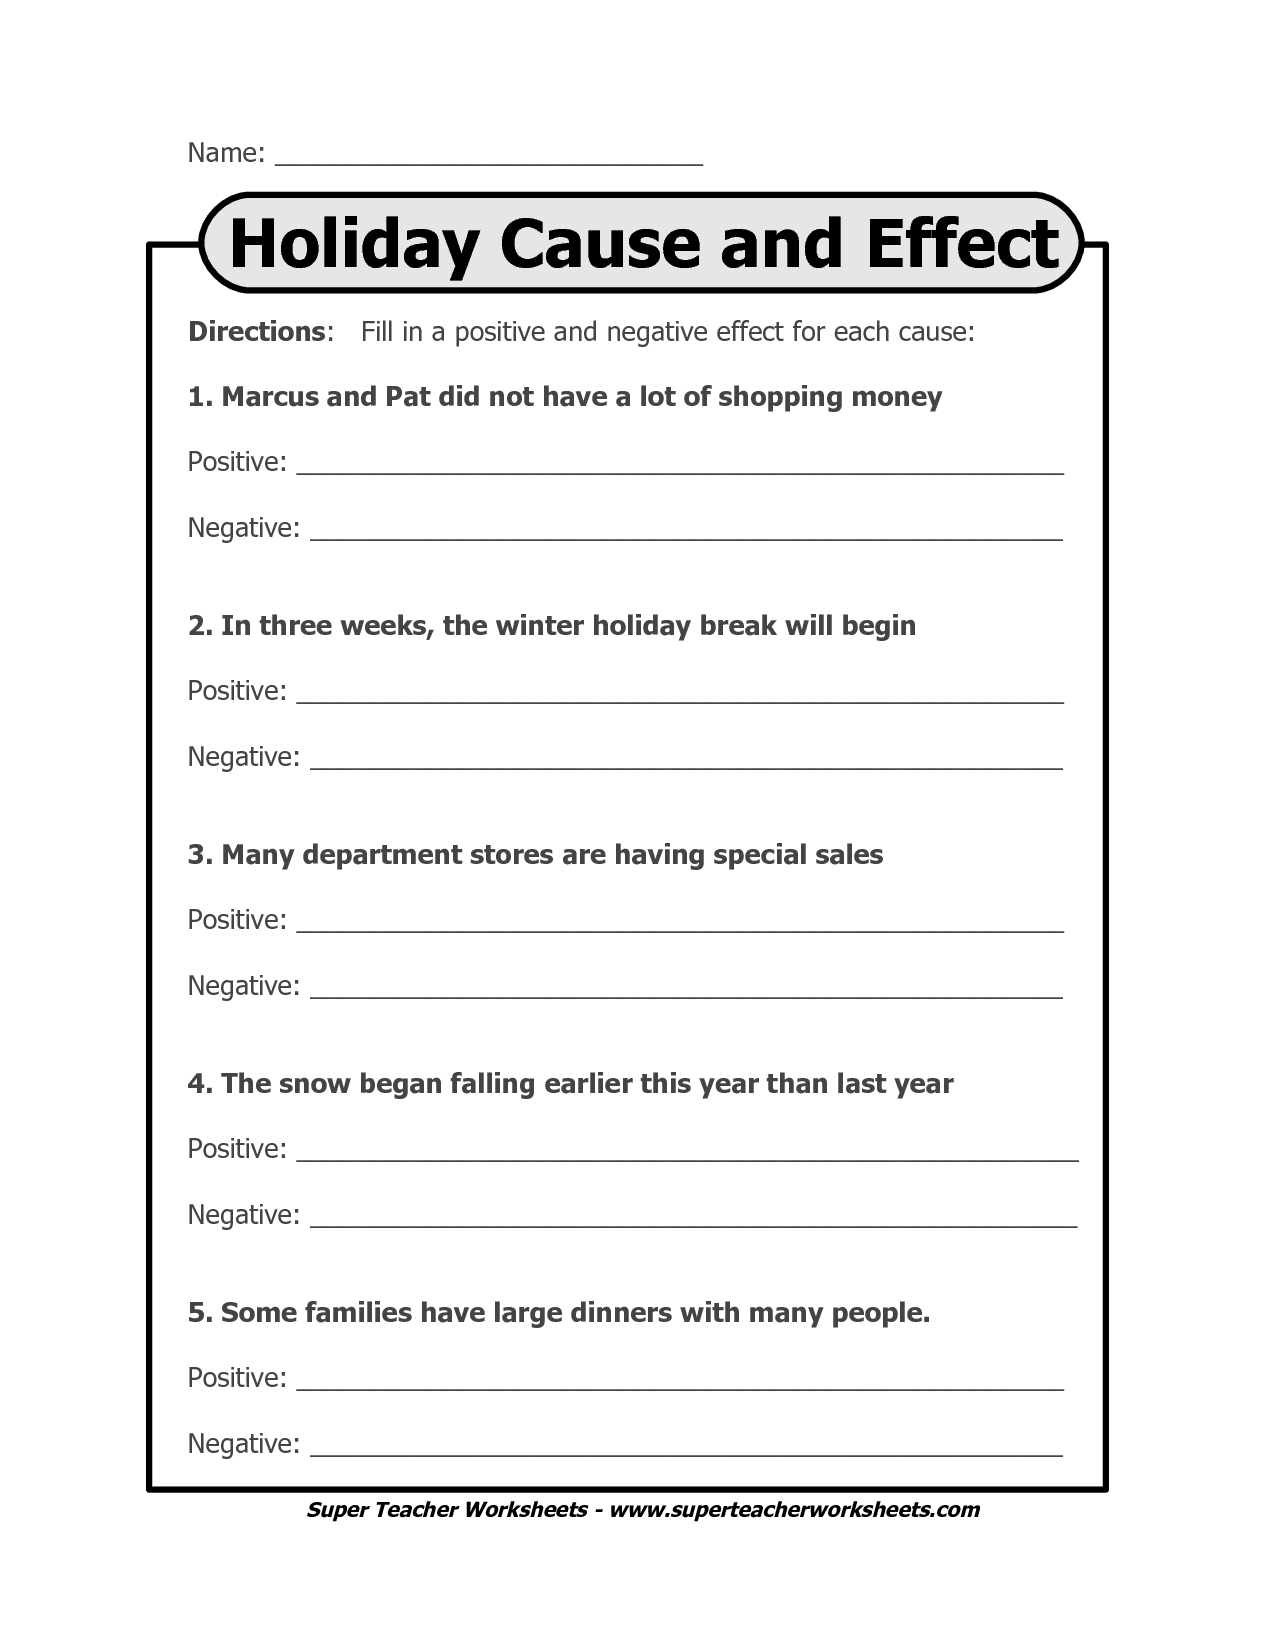 Cause and Effect Worksheets Elementary Image